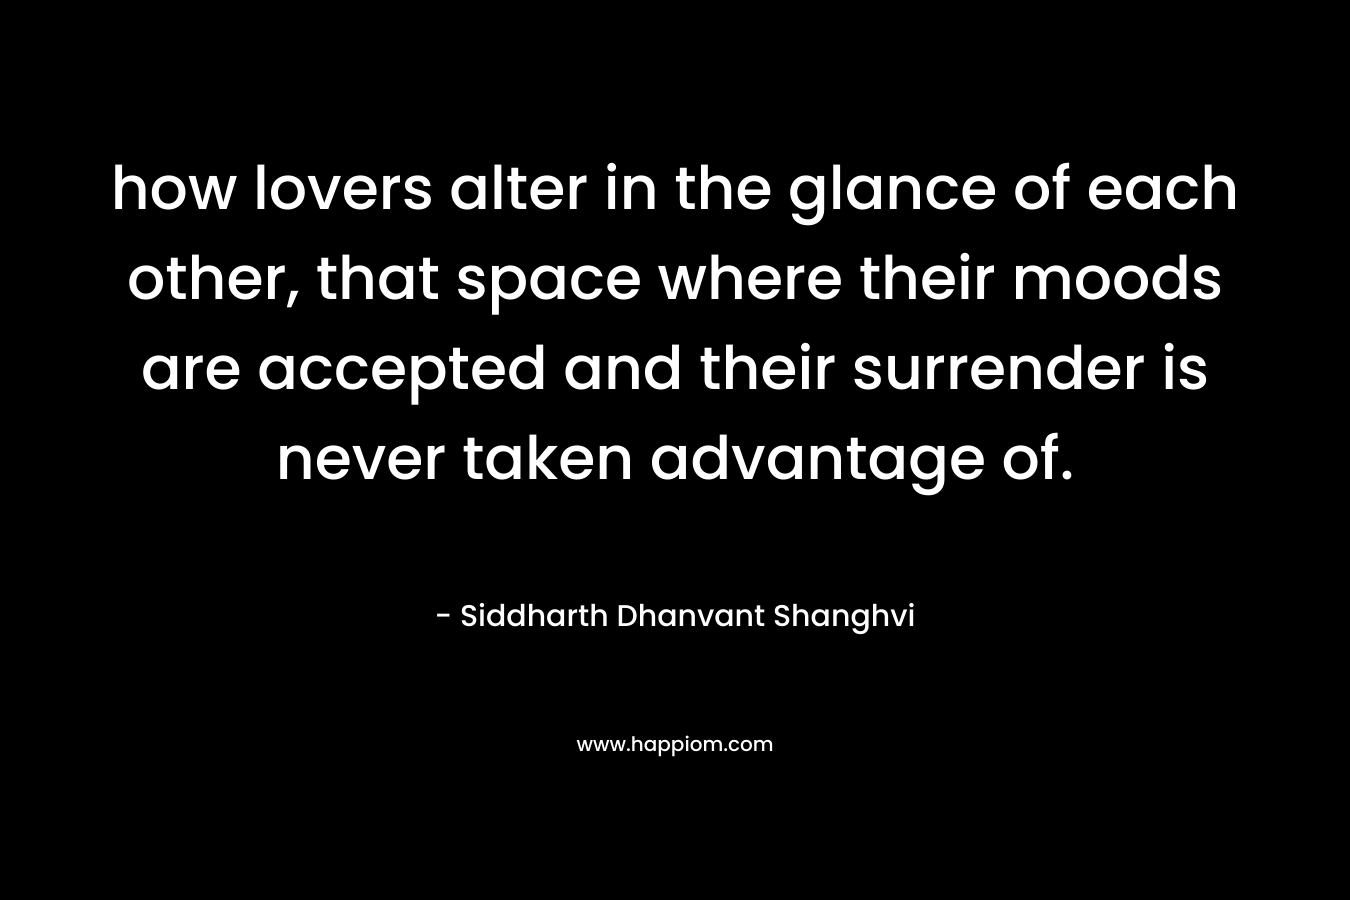 how lovers alter in the glance of each other, that space where their moods are accepted and their surrender is never taken advantage of. – Siddharth Dhanvant Shanghvi